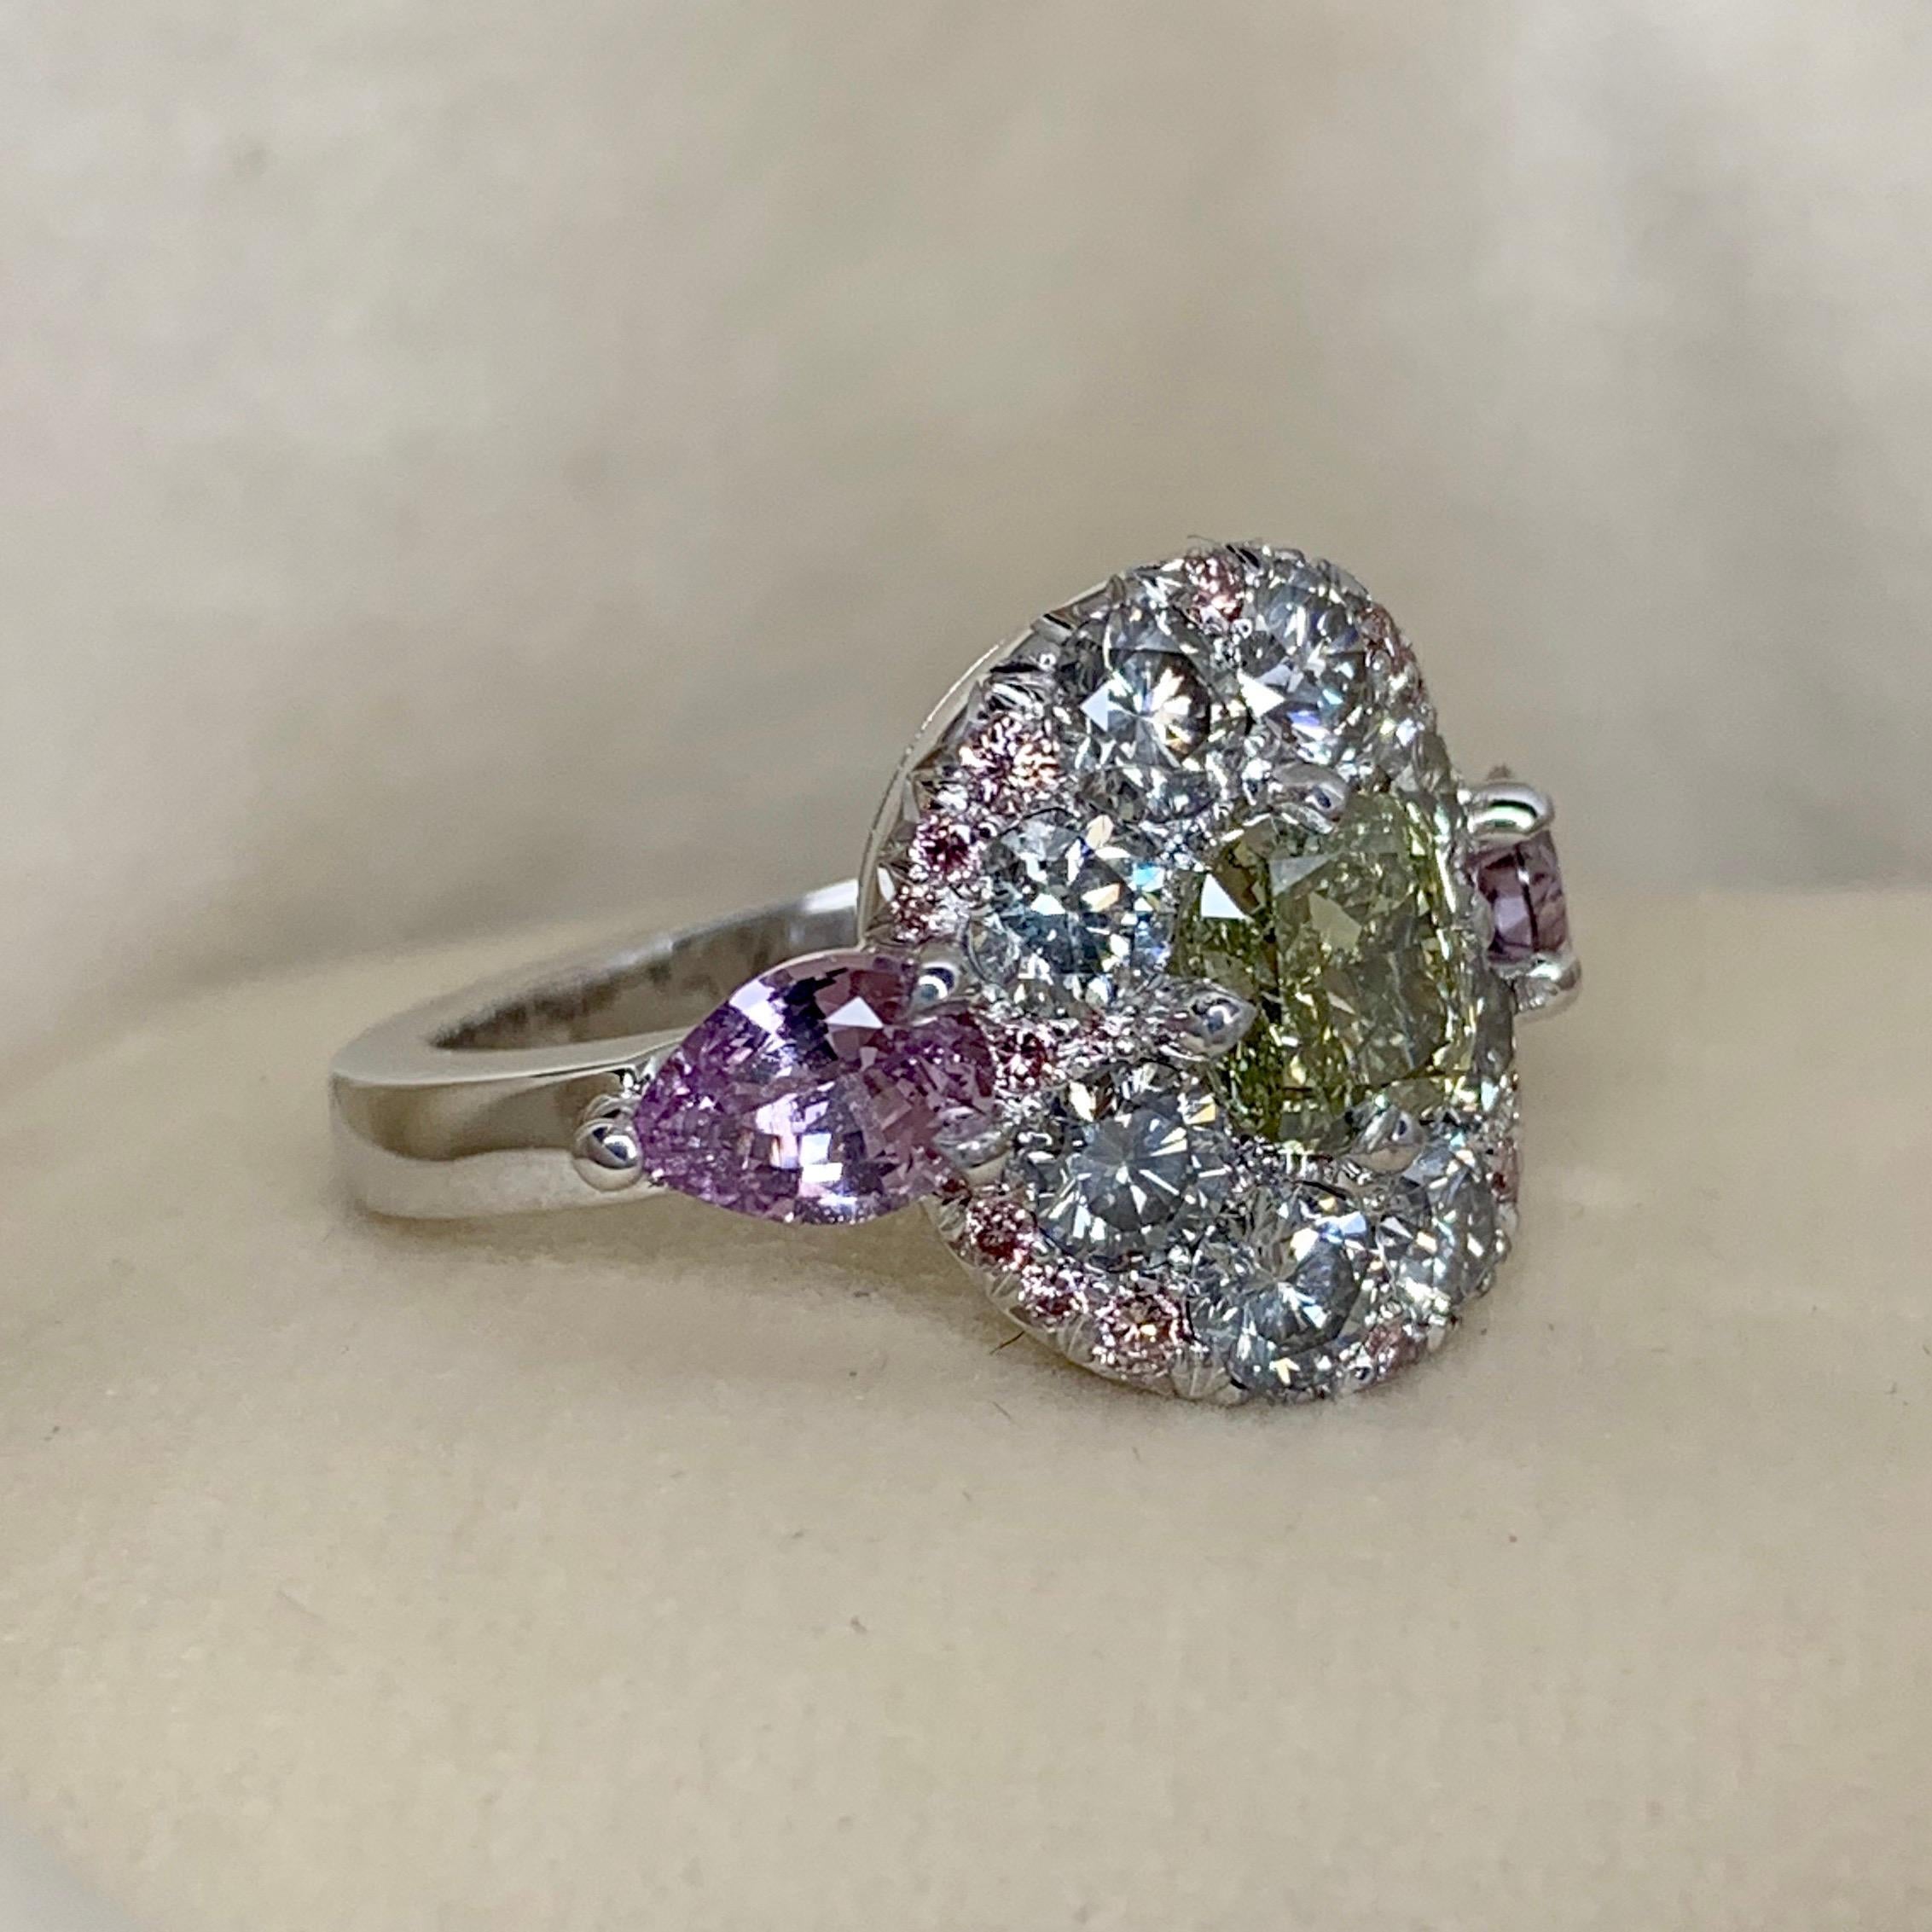 One of a kind ring in 18K White gold 10,2 g. Set with a GIA certified fancy Olive green diamond cushion centerstone 1,02 Carat ( laser inscription GIA 5181202576 ), Fancy Grey diamonds 1,50ct., Fancy Pink diamonds 0,16 ct., fancy blue diamonds 0,08